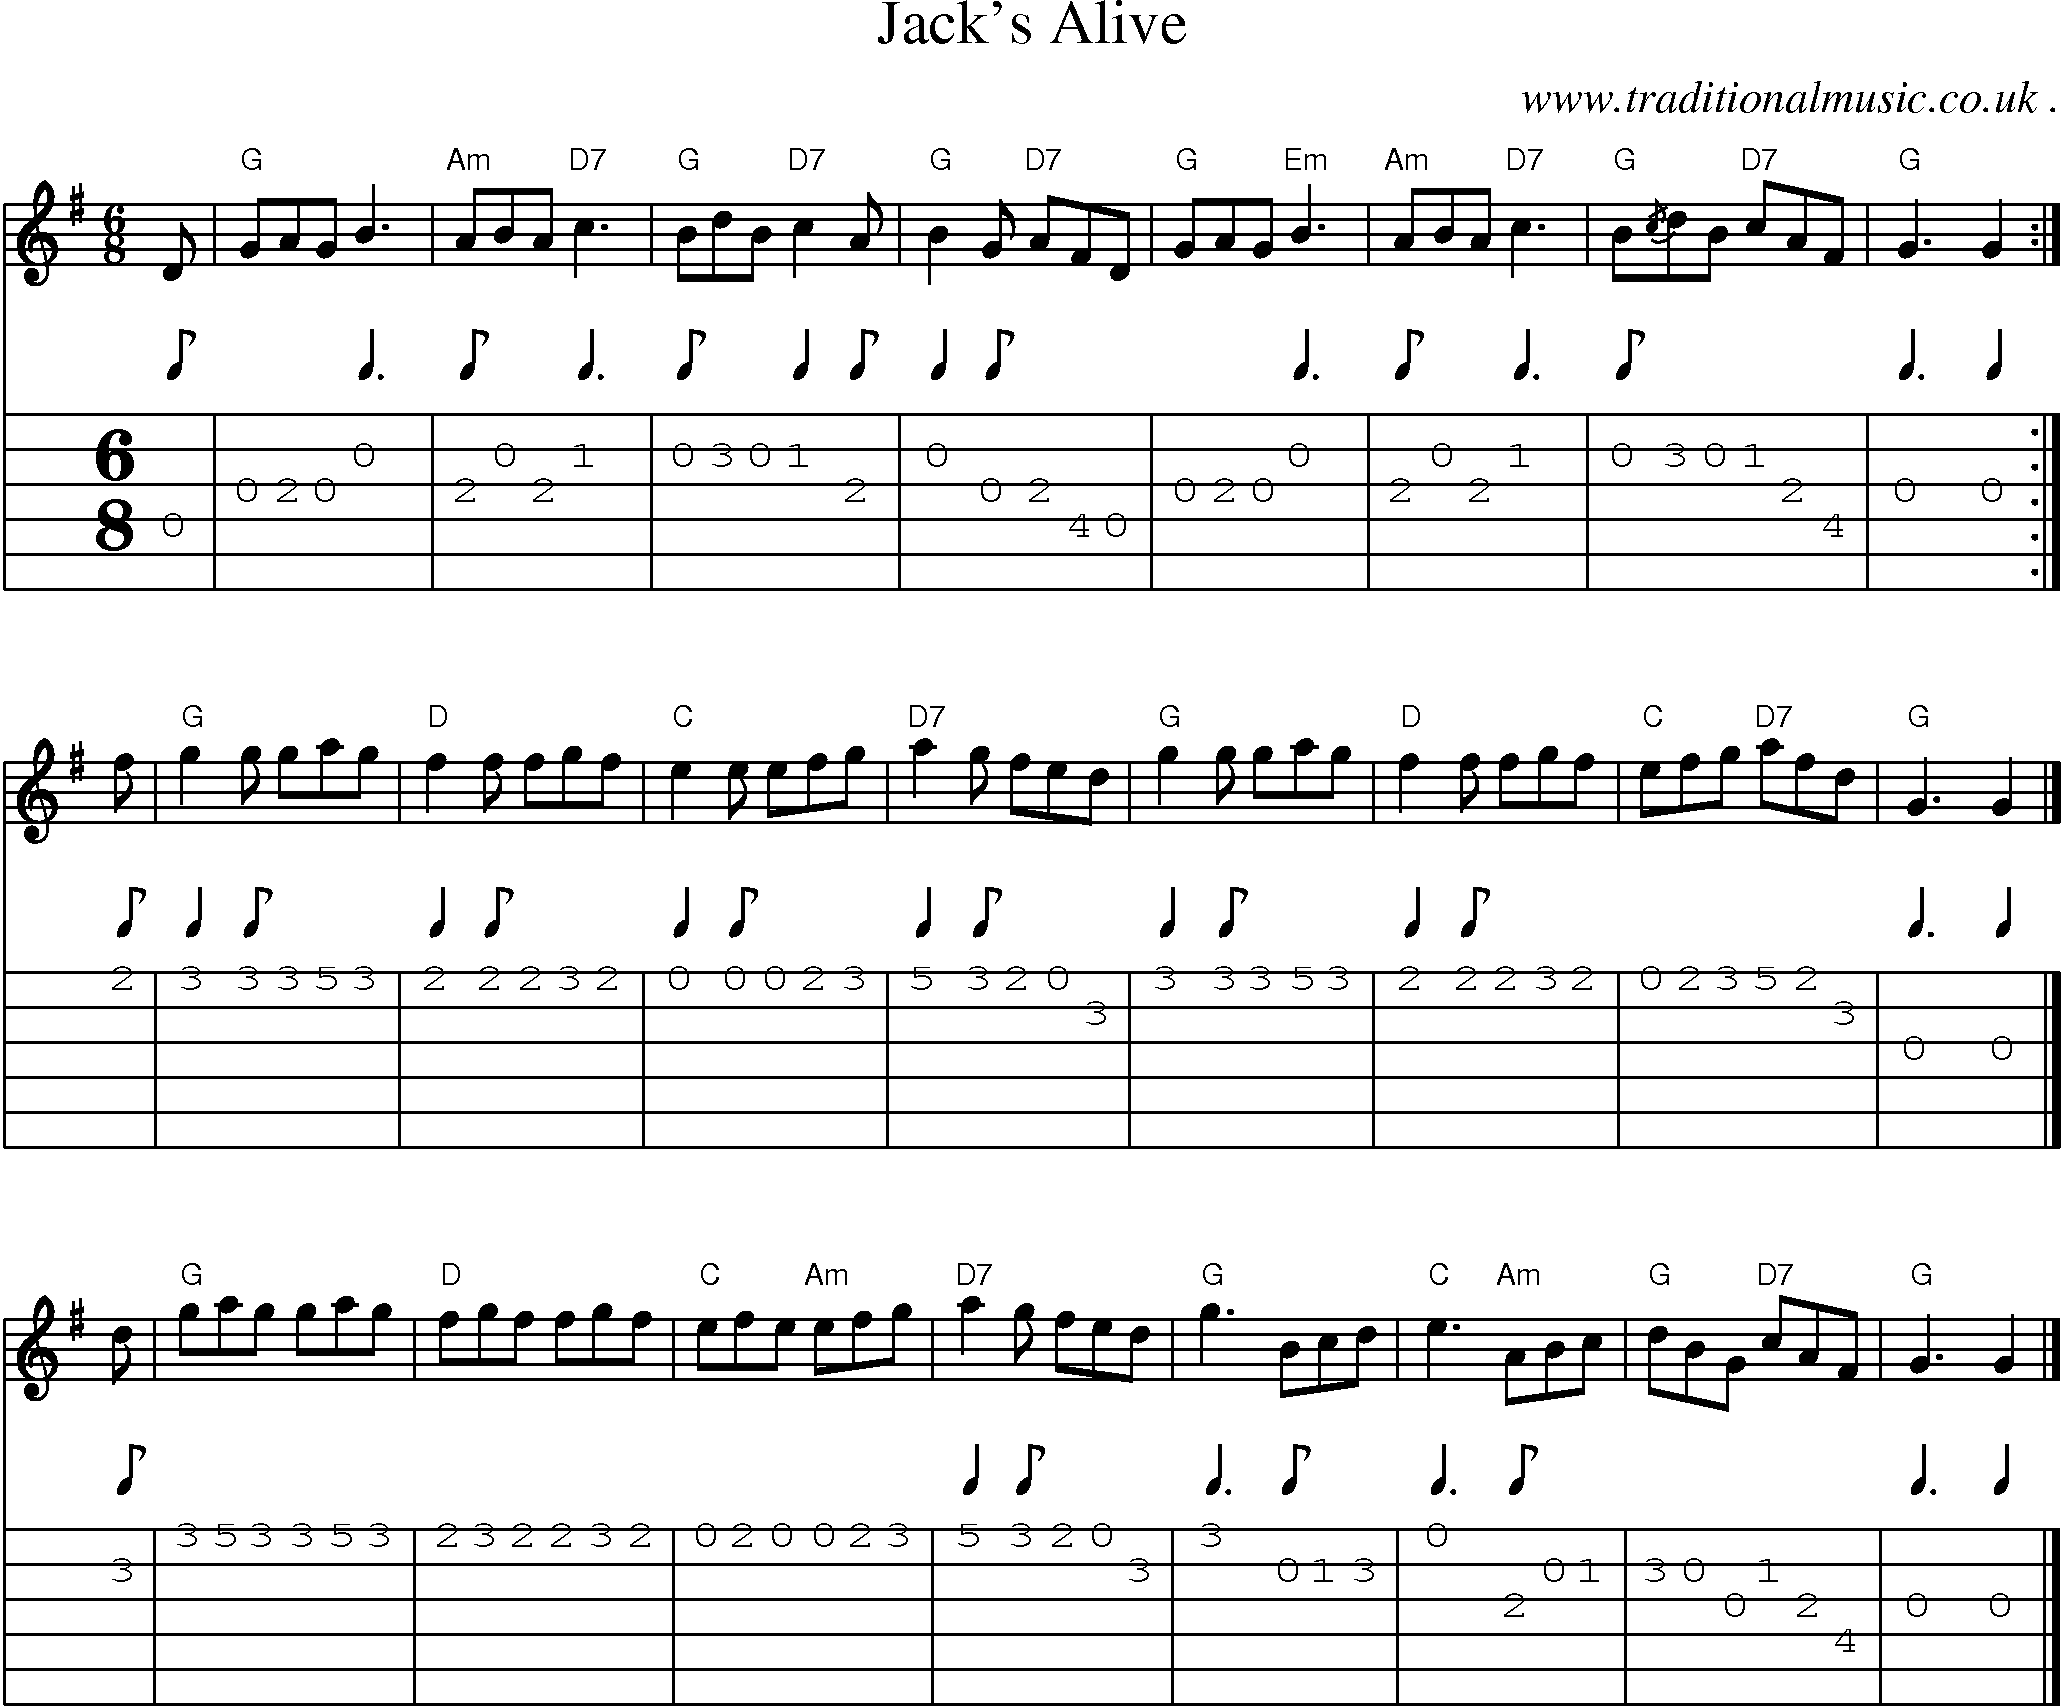 Sheet-music  score, Chords and Guitar Tabs for Jacks Alive